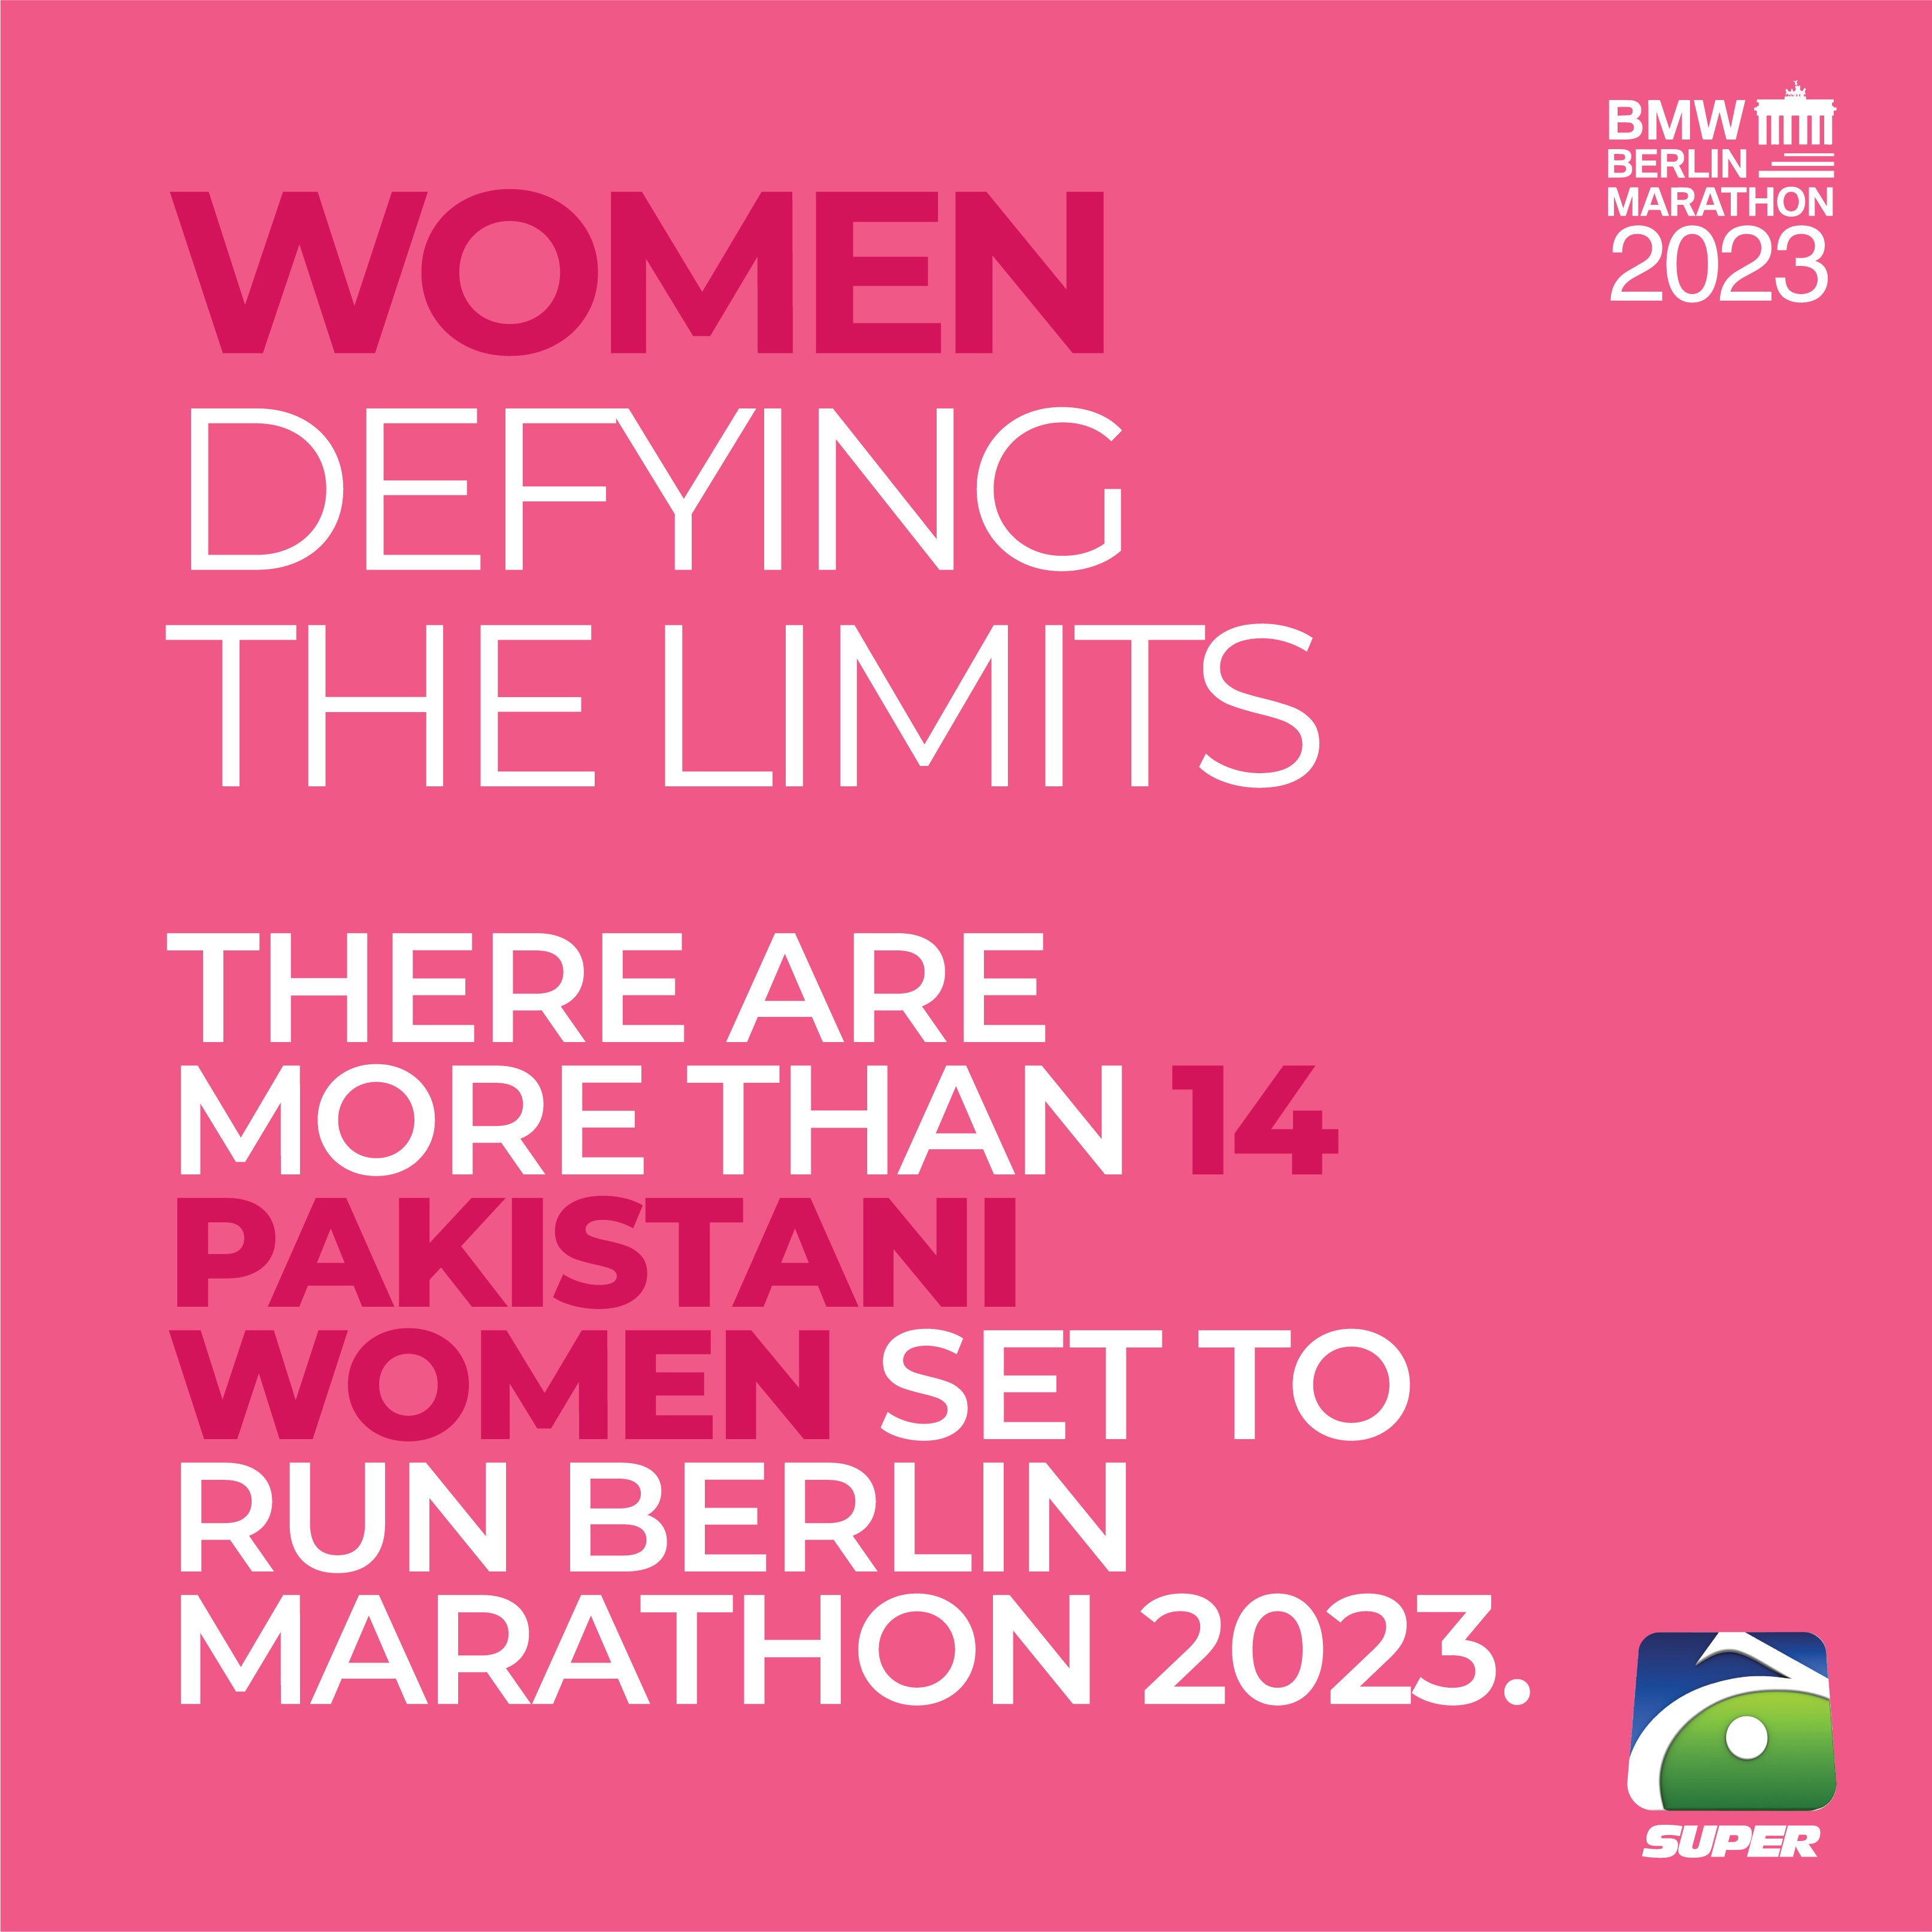 Record number of Pakistanis to participate in Berlin Marathon 2023